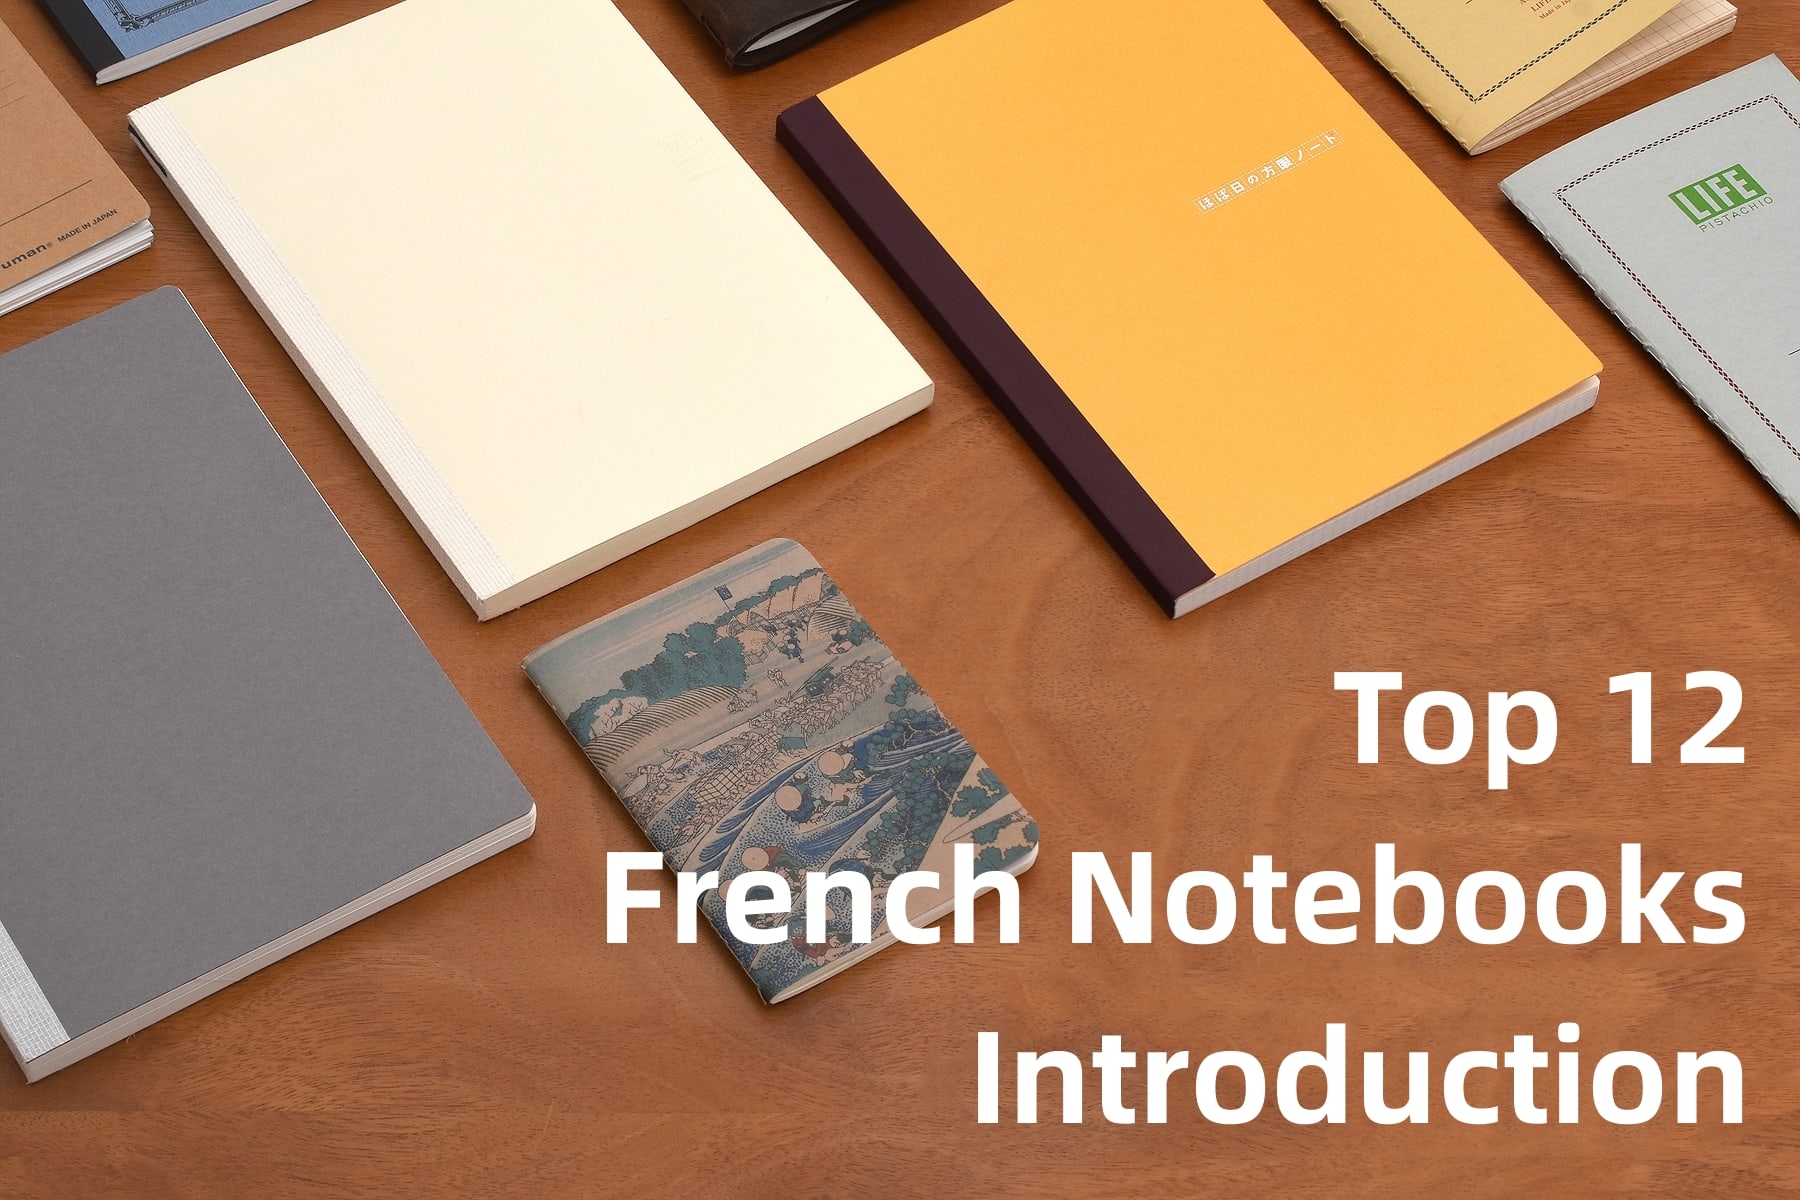 Top 12 French Notebooks Introduction